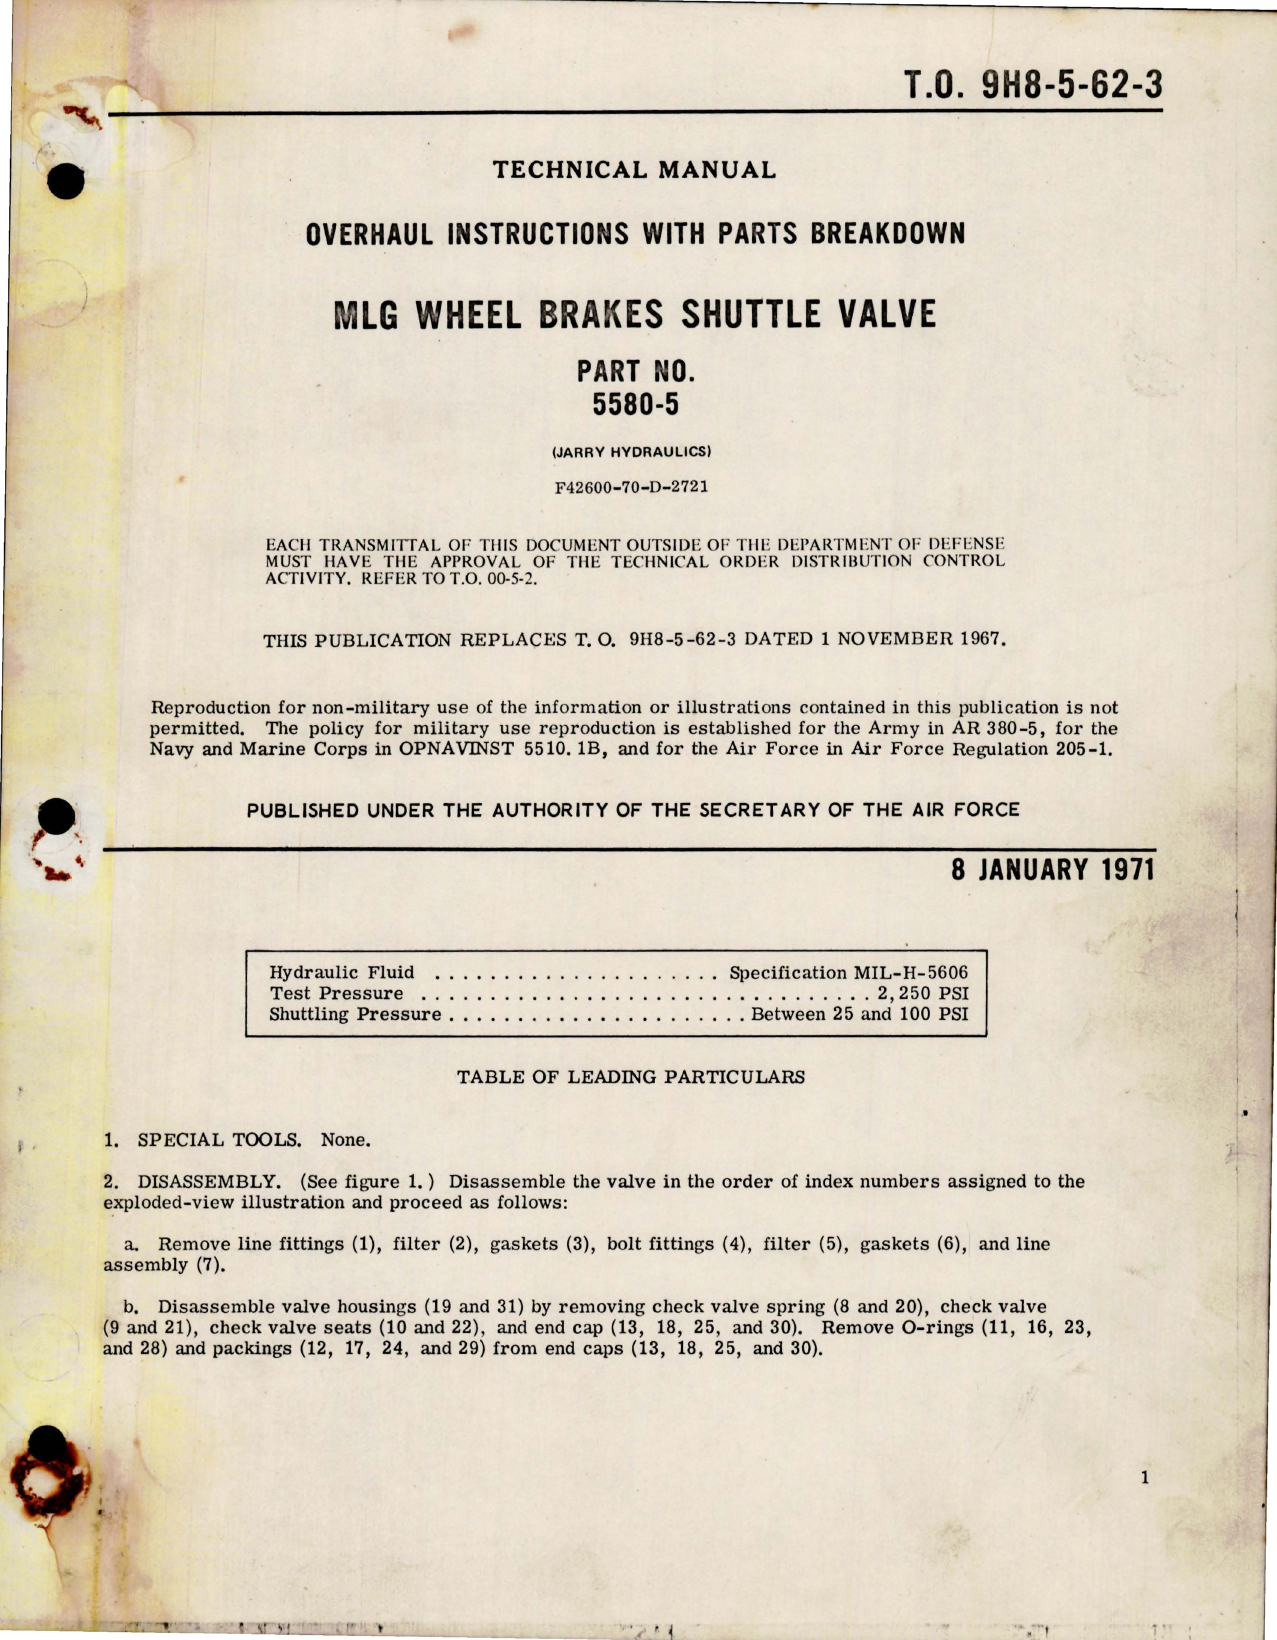 Sample page 1 from AirCorps Library document: Overhaul Instructions with Parts for MLG Wheel Brakes Shuttle Valve - Part 5580-5